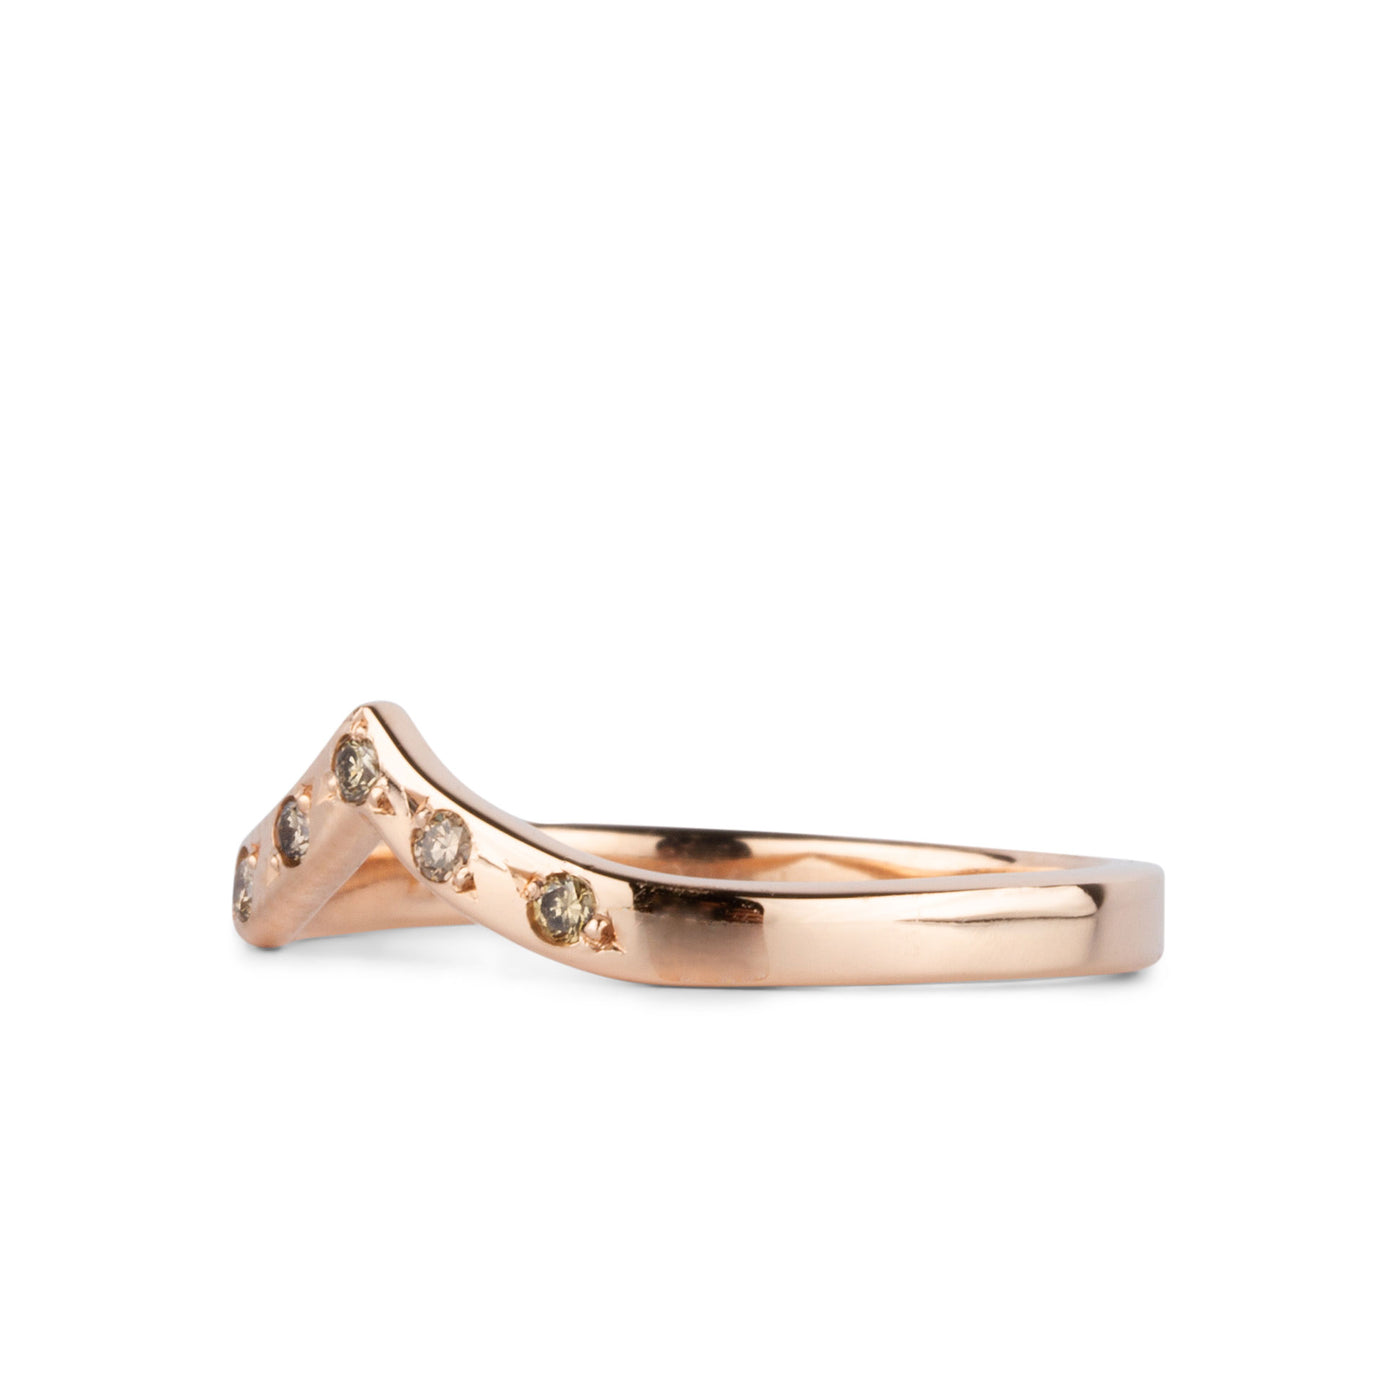 Peaked 14k rose gold band with five champagne diamonds in delicate star settings side view on a white background